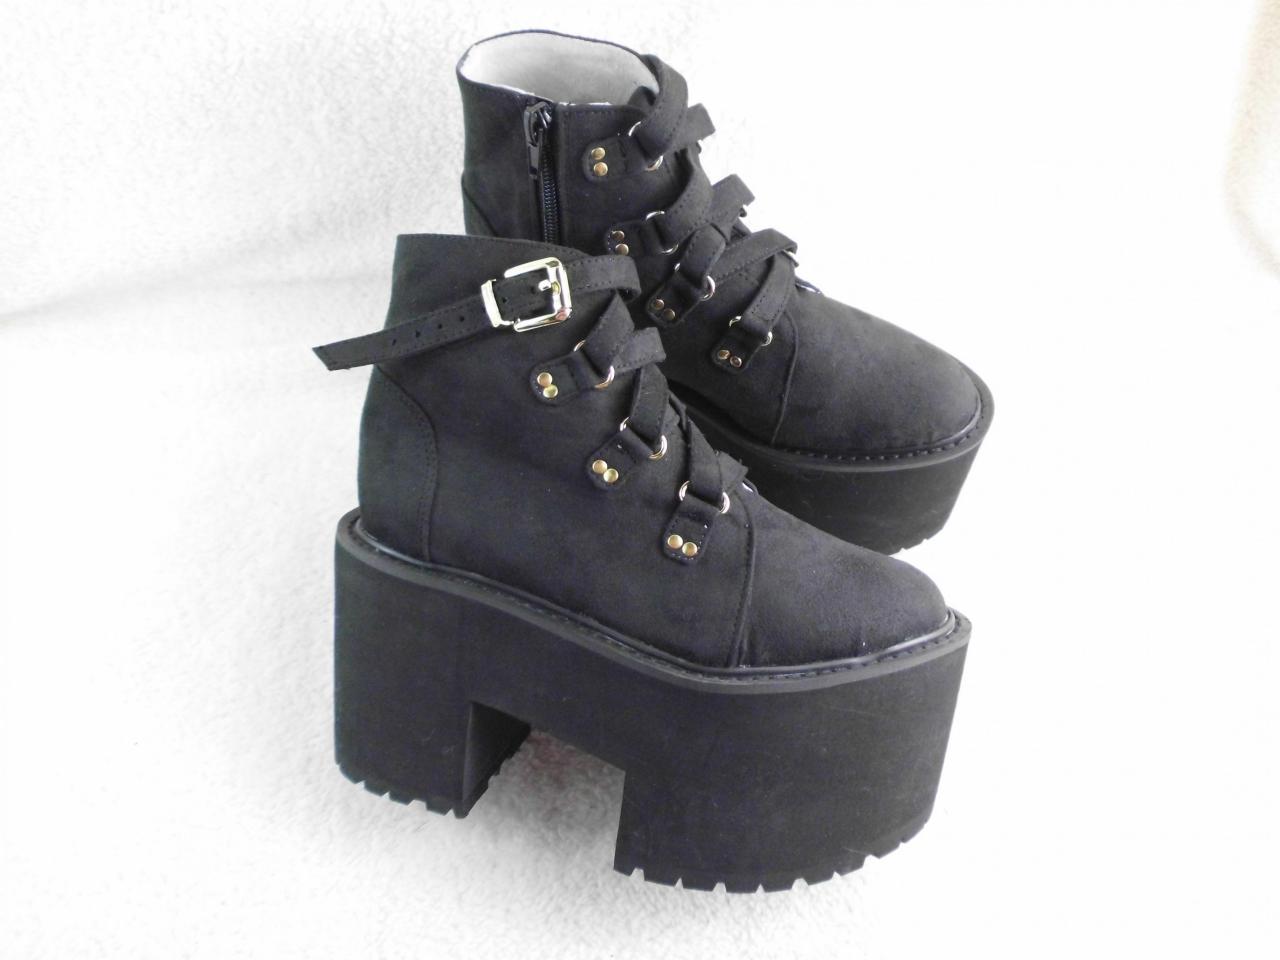 Women High Platform Cleated Sole Boots With Criss-cross Straps And Zipper Closure